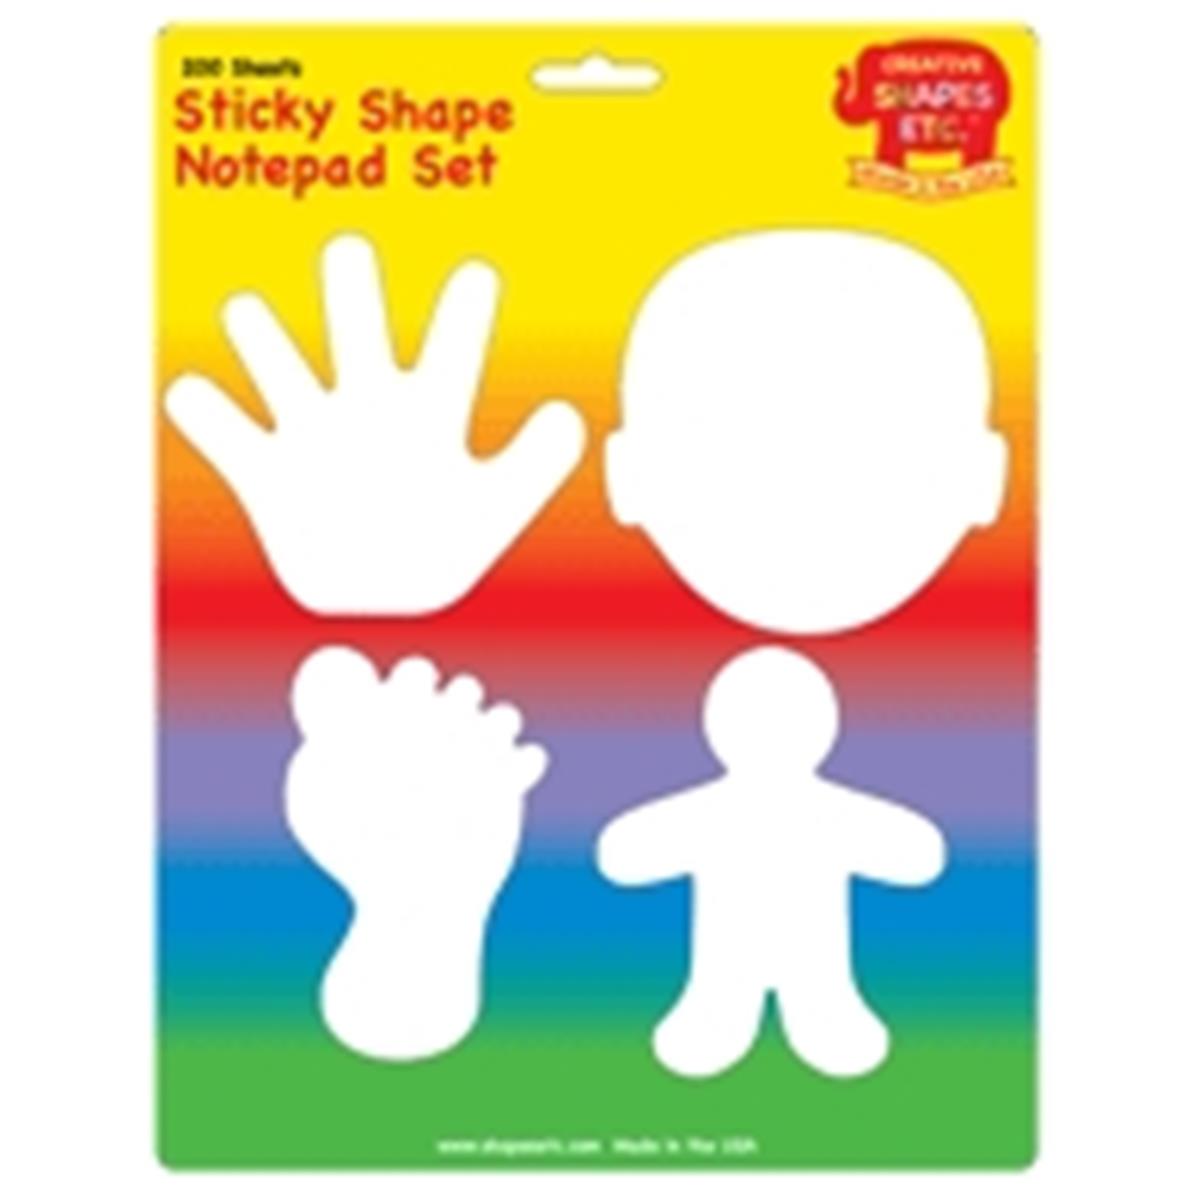 Se-0991 4.5 X 4 In. Color Sticky Shape Notepad Set, Body Parts - 200 Sheets Per Pack